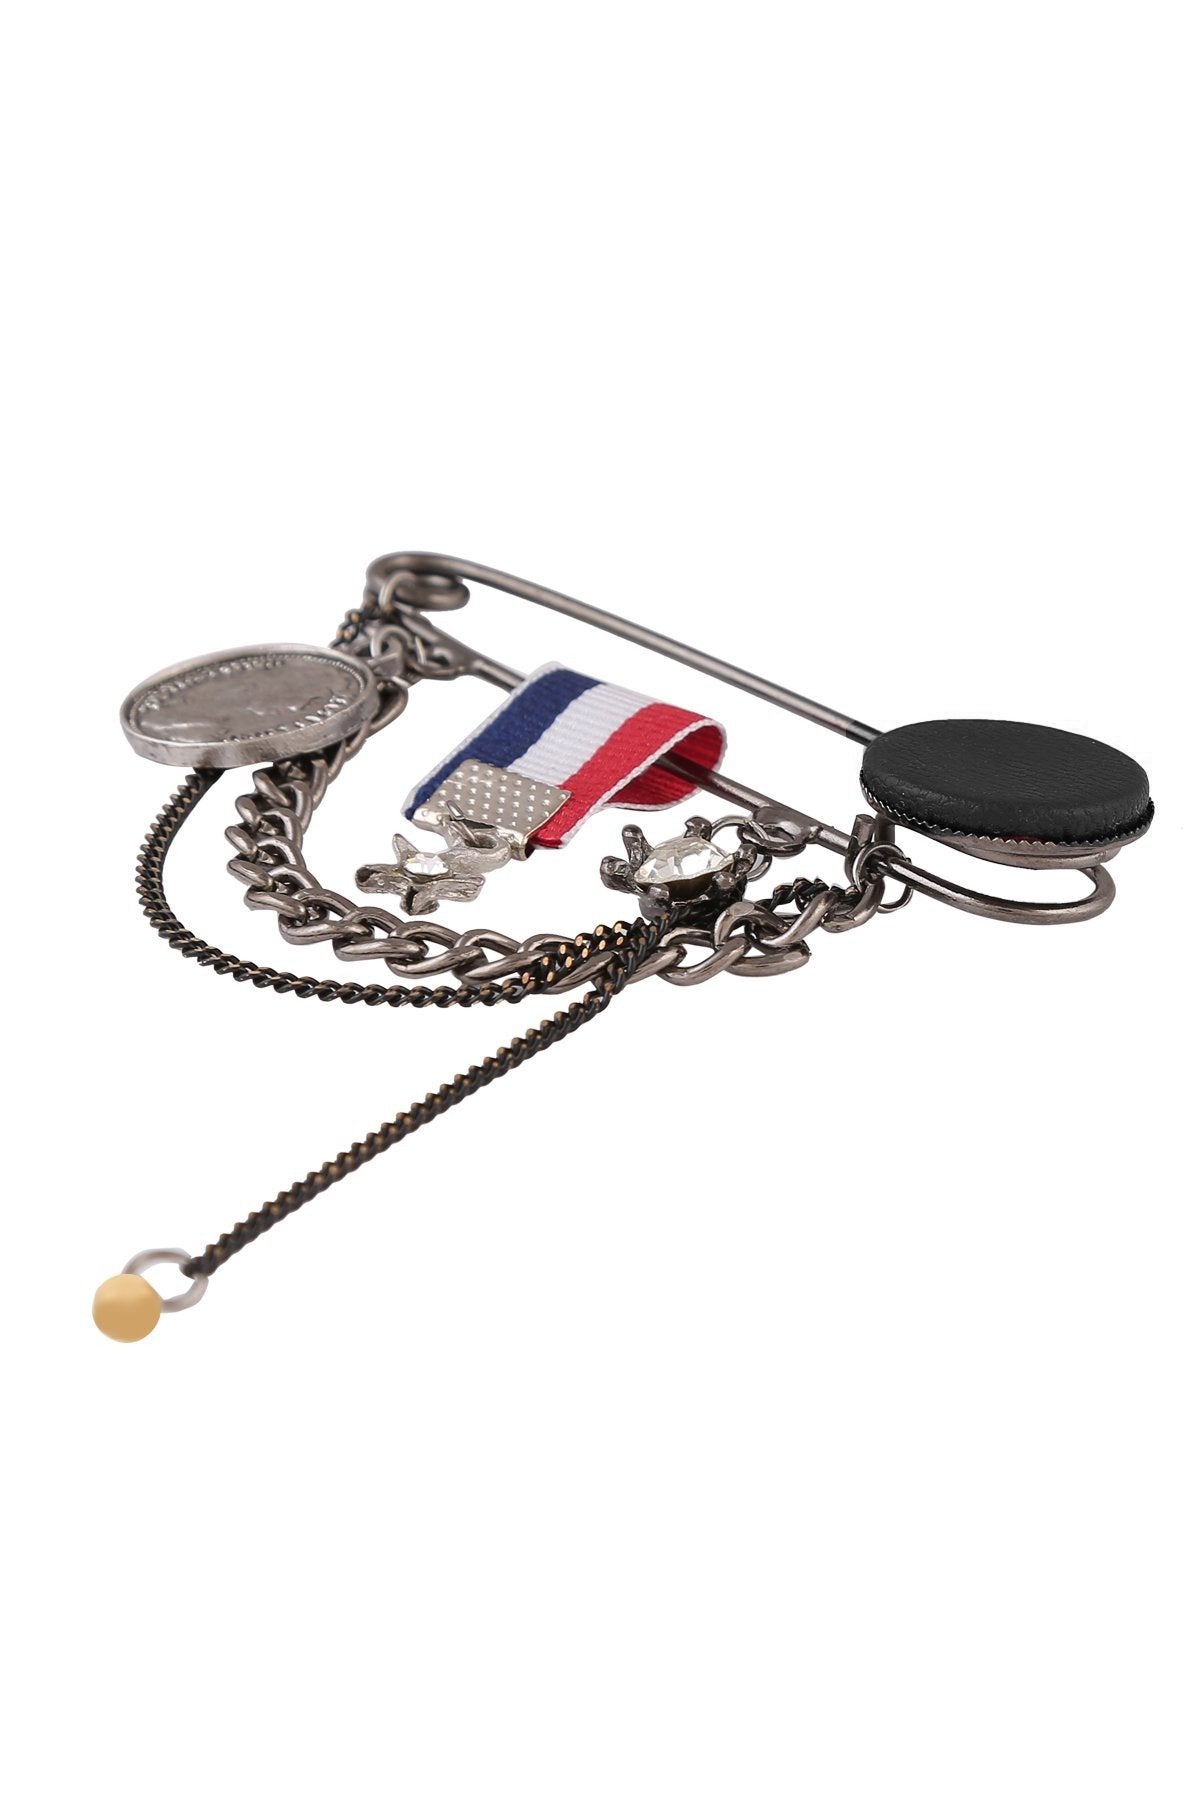 Elegant Flag and Coin Chain Hanging Black Nickel Safety Pin Brooch